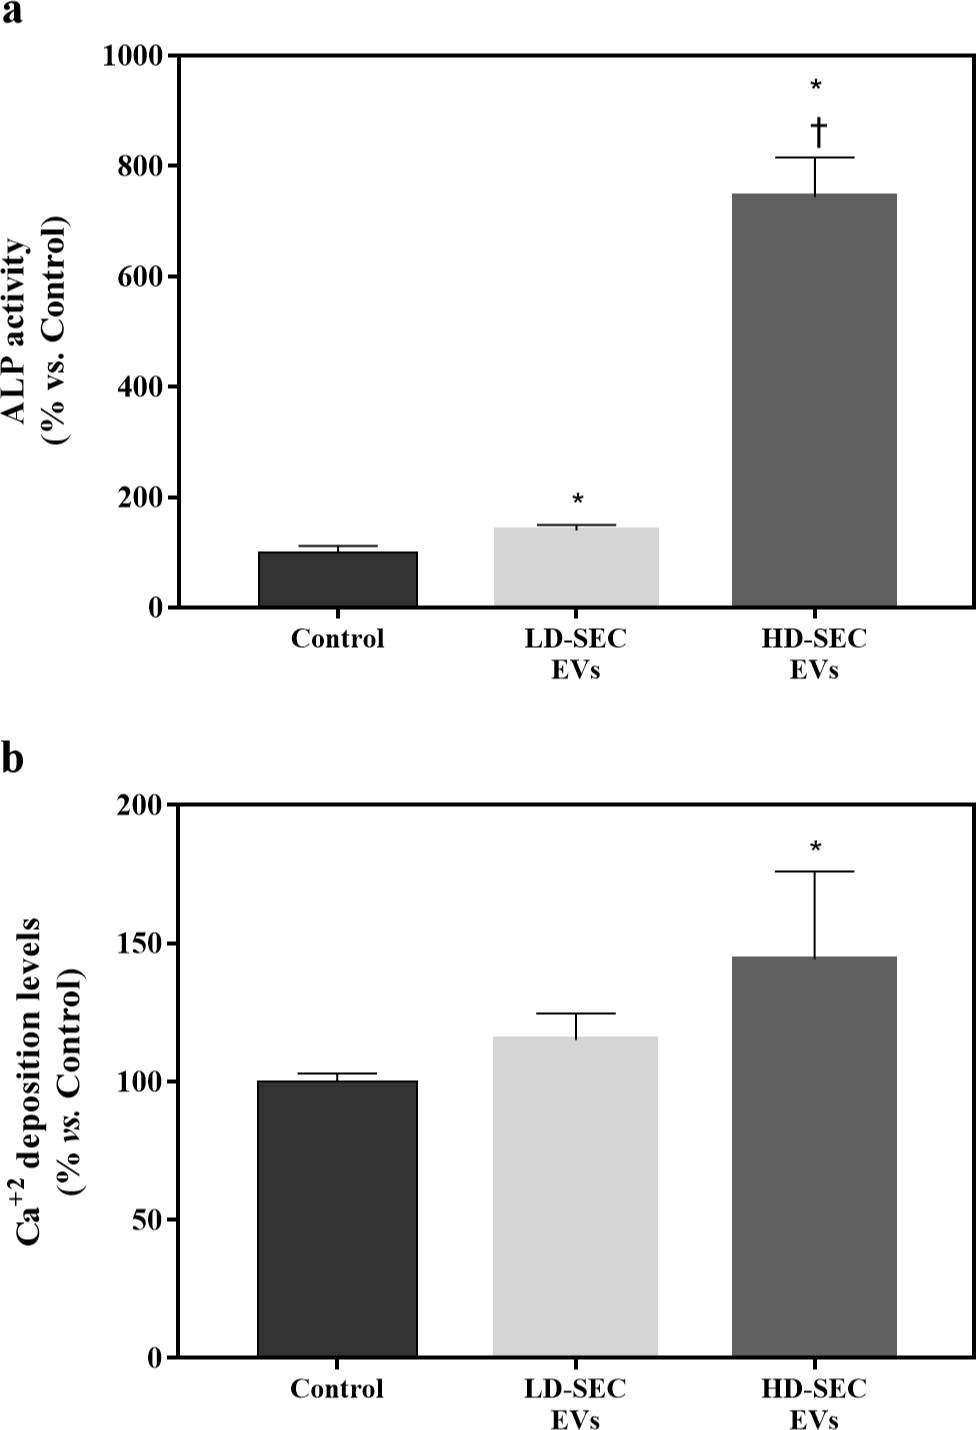 Fig. 5 
            a) Alkaline phosphatase (ALP) activity from cellular lysate after 14 days of low dose size exclusion chromatography extracellular vesicle (LD-SEC-EV) and high dose (HD)-SEC-EV treatments. Data were normalized to the control group, set to 100%. Results were compared using analysis of variance (ANOVA) and Games-Howells as post hoc. b) Calcium (Ca2+) deposition on the cell monolayer after 14 days of LD-SEC-EV and HD-SEC-EV treatments. Data represent the mean and SEM for each group. Data were normalized to the control group, set to 100%. Results were compared using ANOVA and Games-Howells as post hoc. *Statistically significant (p < 0.05) differences compared to the control group. †Statistically significant differences compared to LD-SEC-EVs.
          